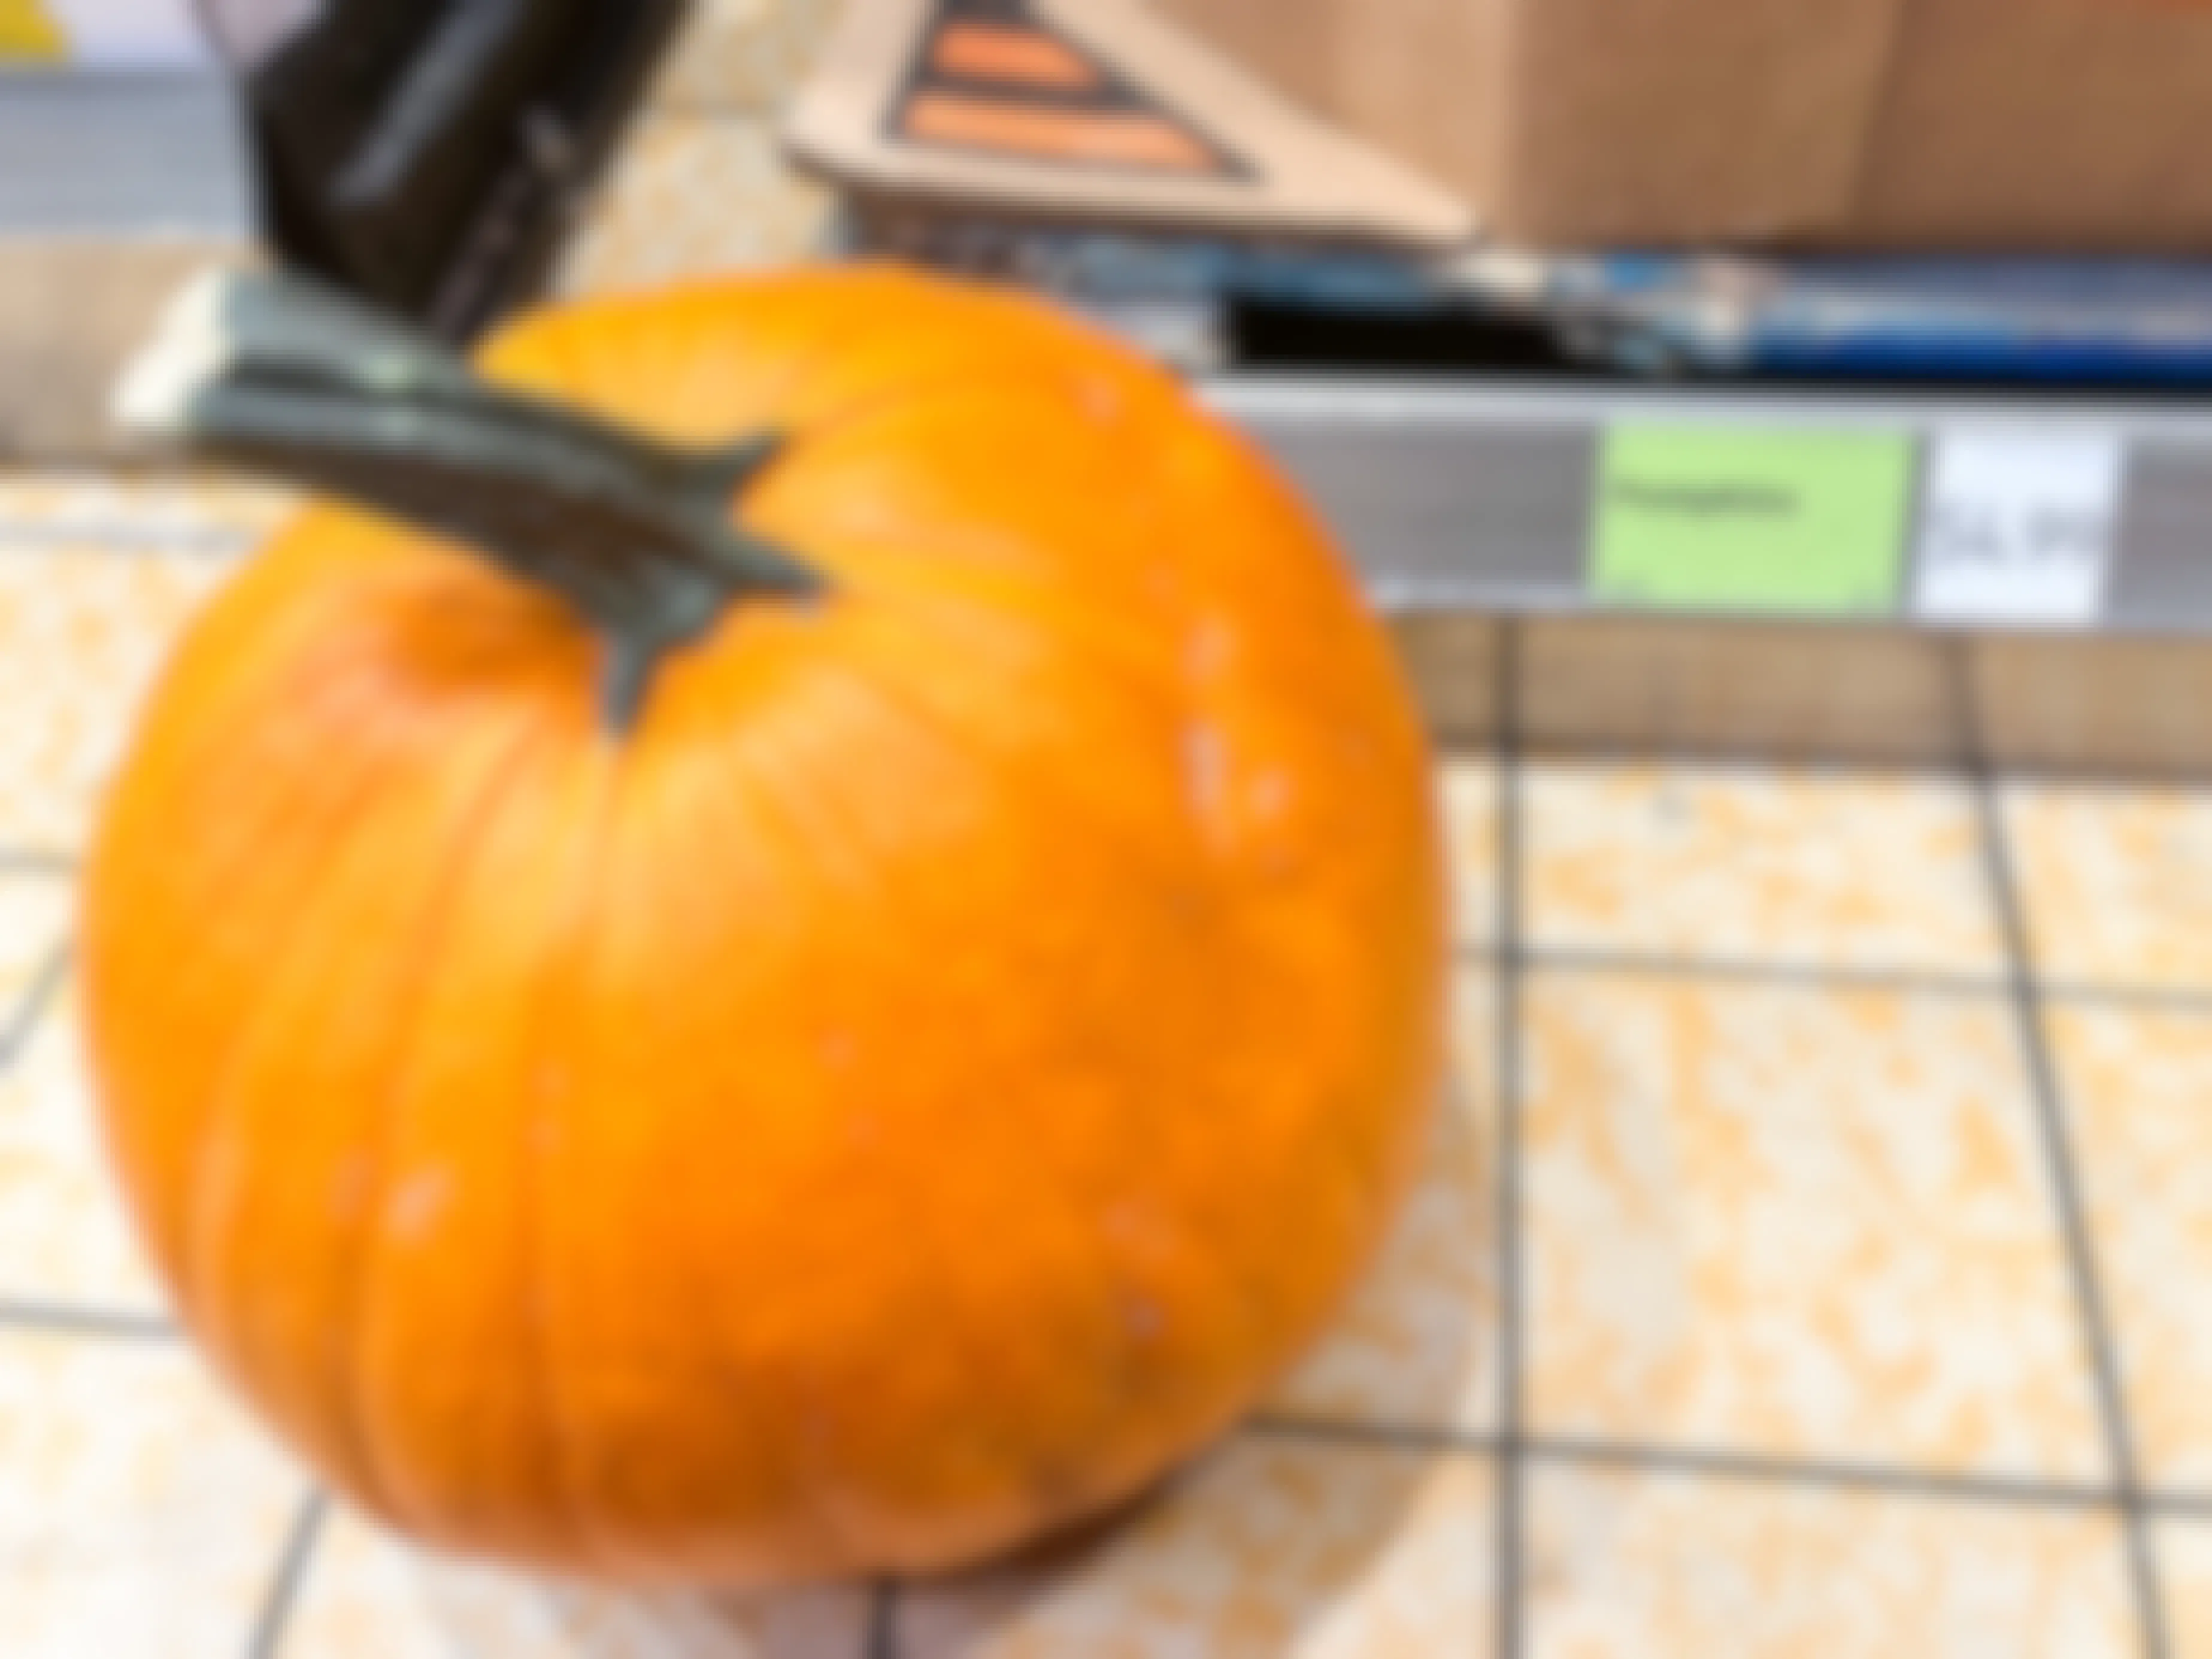 A pumpkin from Aldi on the floor next to the price tag which reads, "$4.99